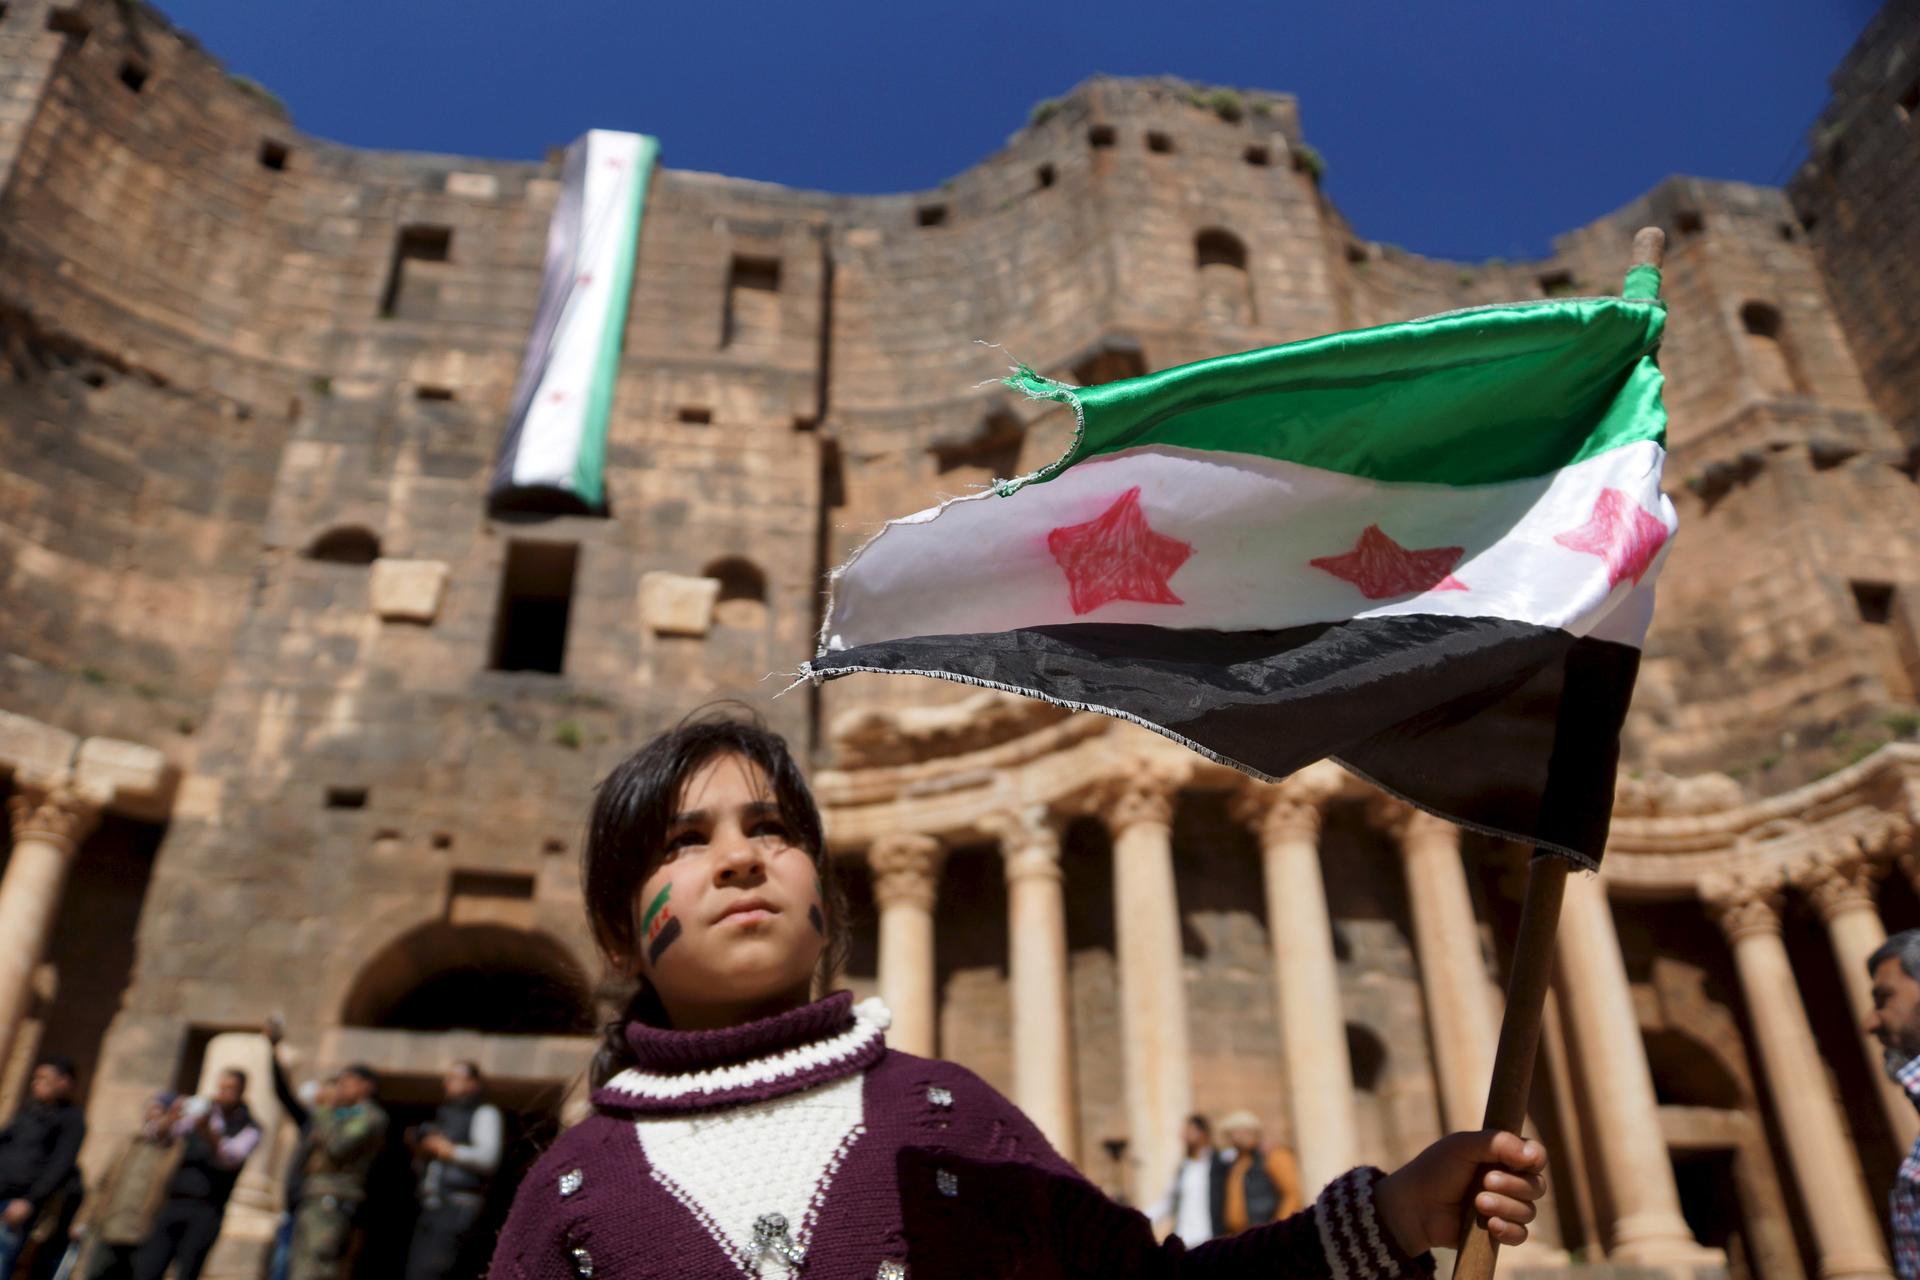 A Syrian girl waves an opposition flag during an anti-government protest inside a 2nd century Roman amphitheater in the historic Syrian southern town of Bosra al-Sham, in Deraa, Syria.